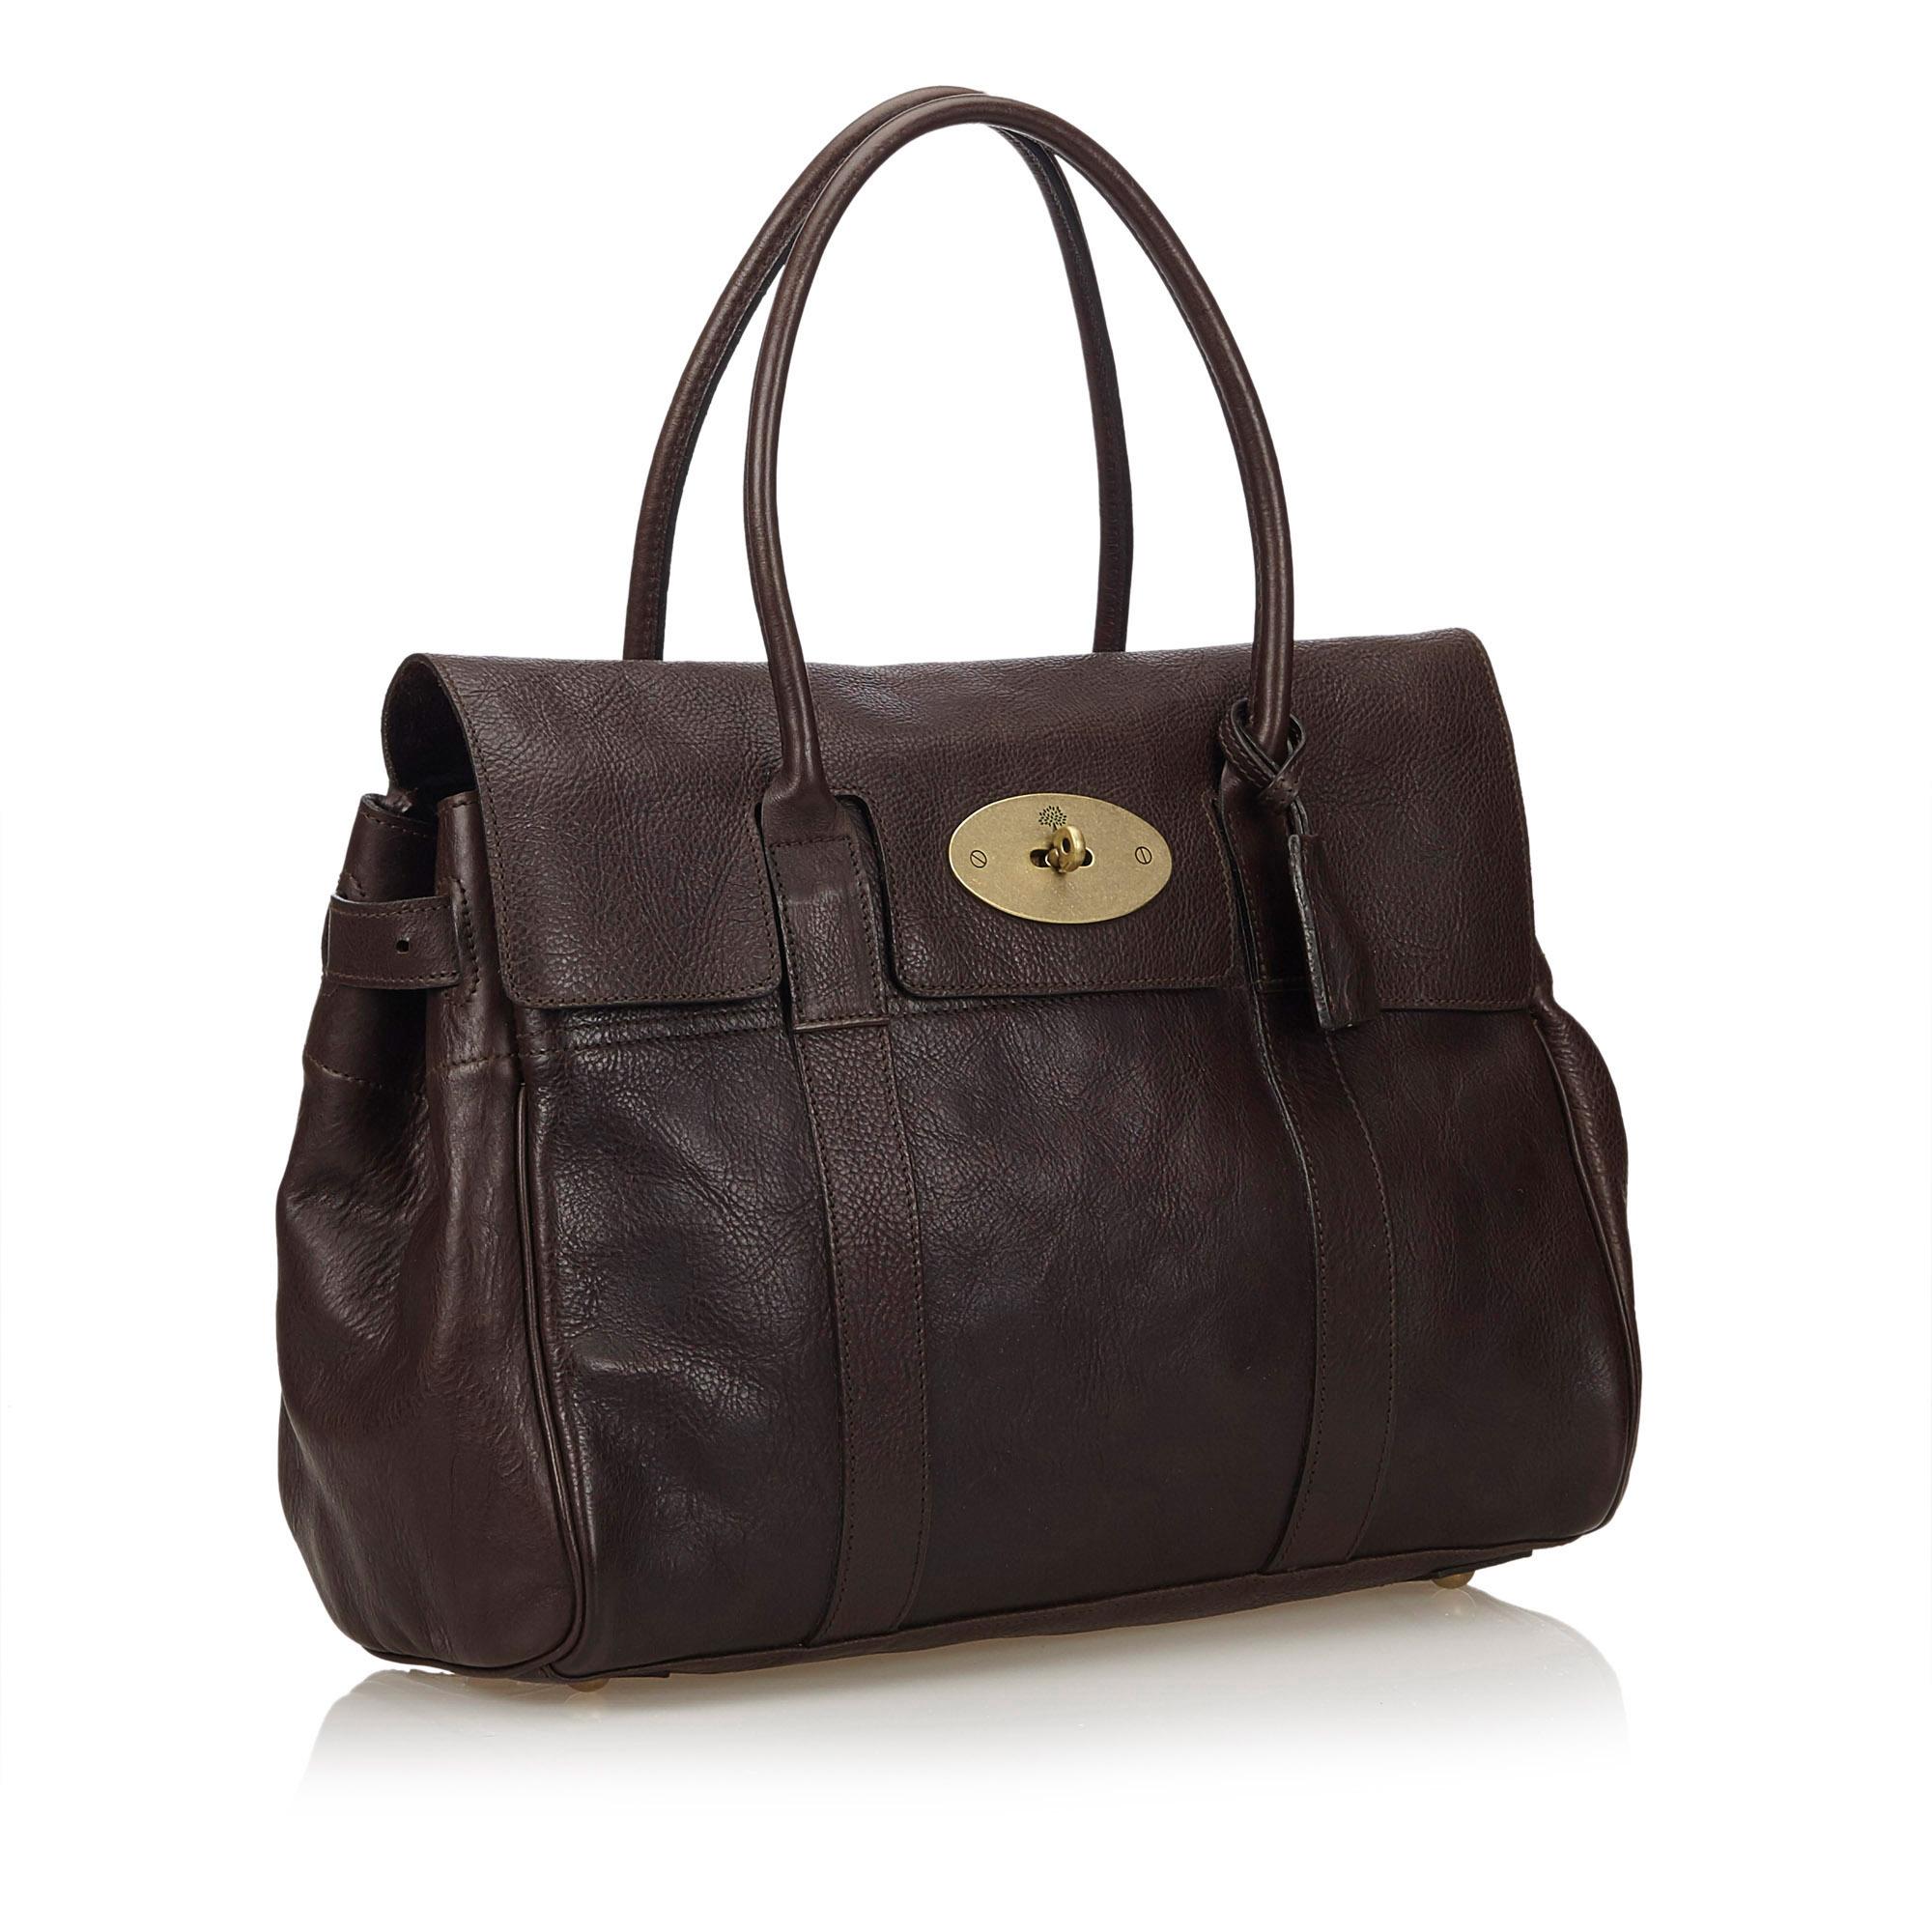 The Bayswater features a leather body, rolled handles, a front flap with a twist lock closure, adjustable belt details on the sides, metal feet, and an interior zip pocket. It carries as B condition rating.

Inclusions: 
Dust